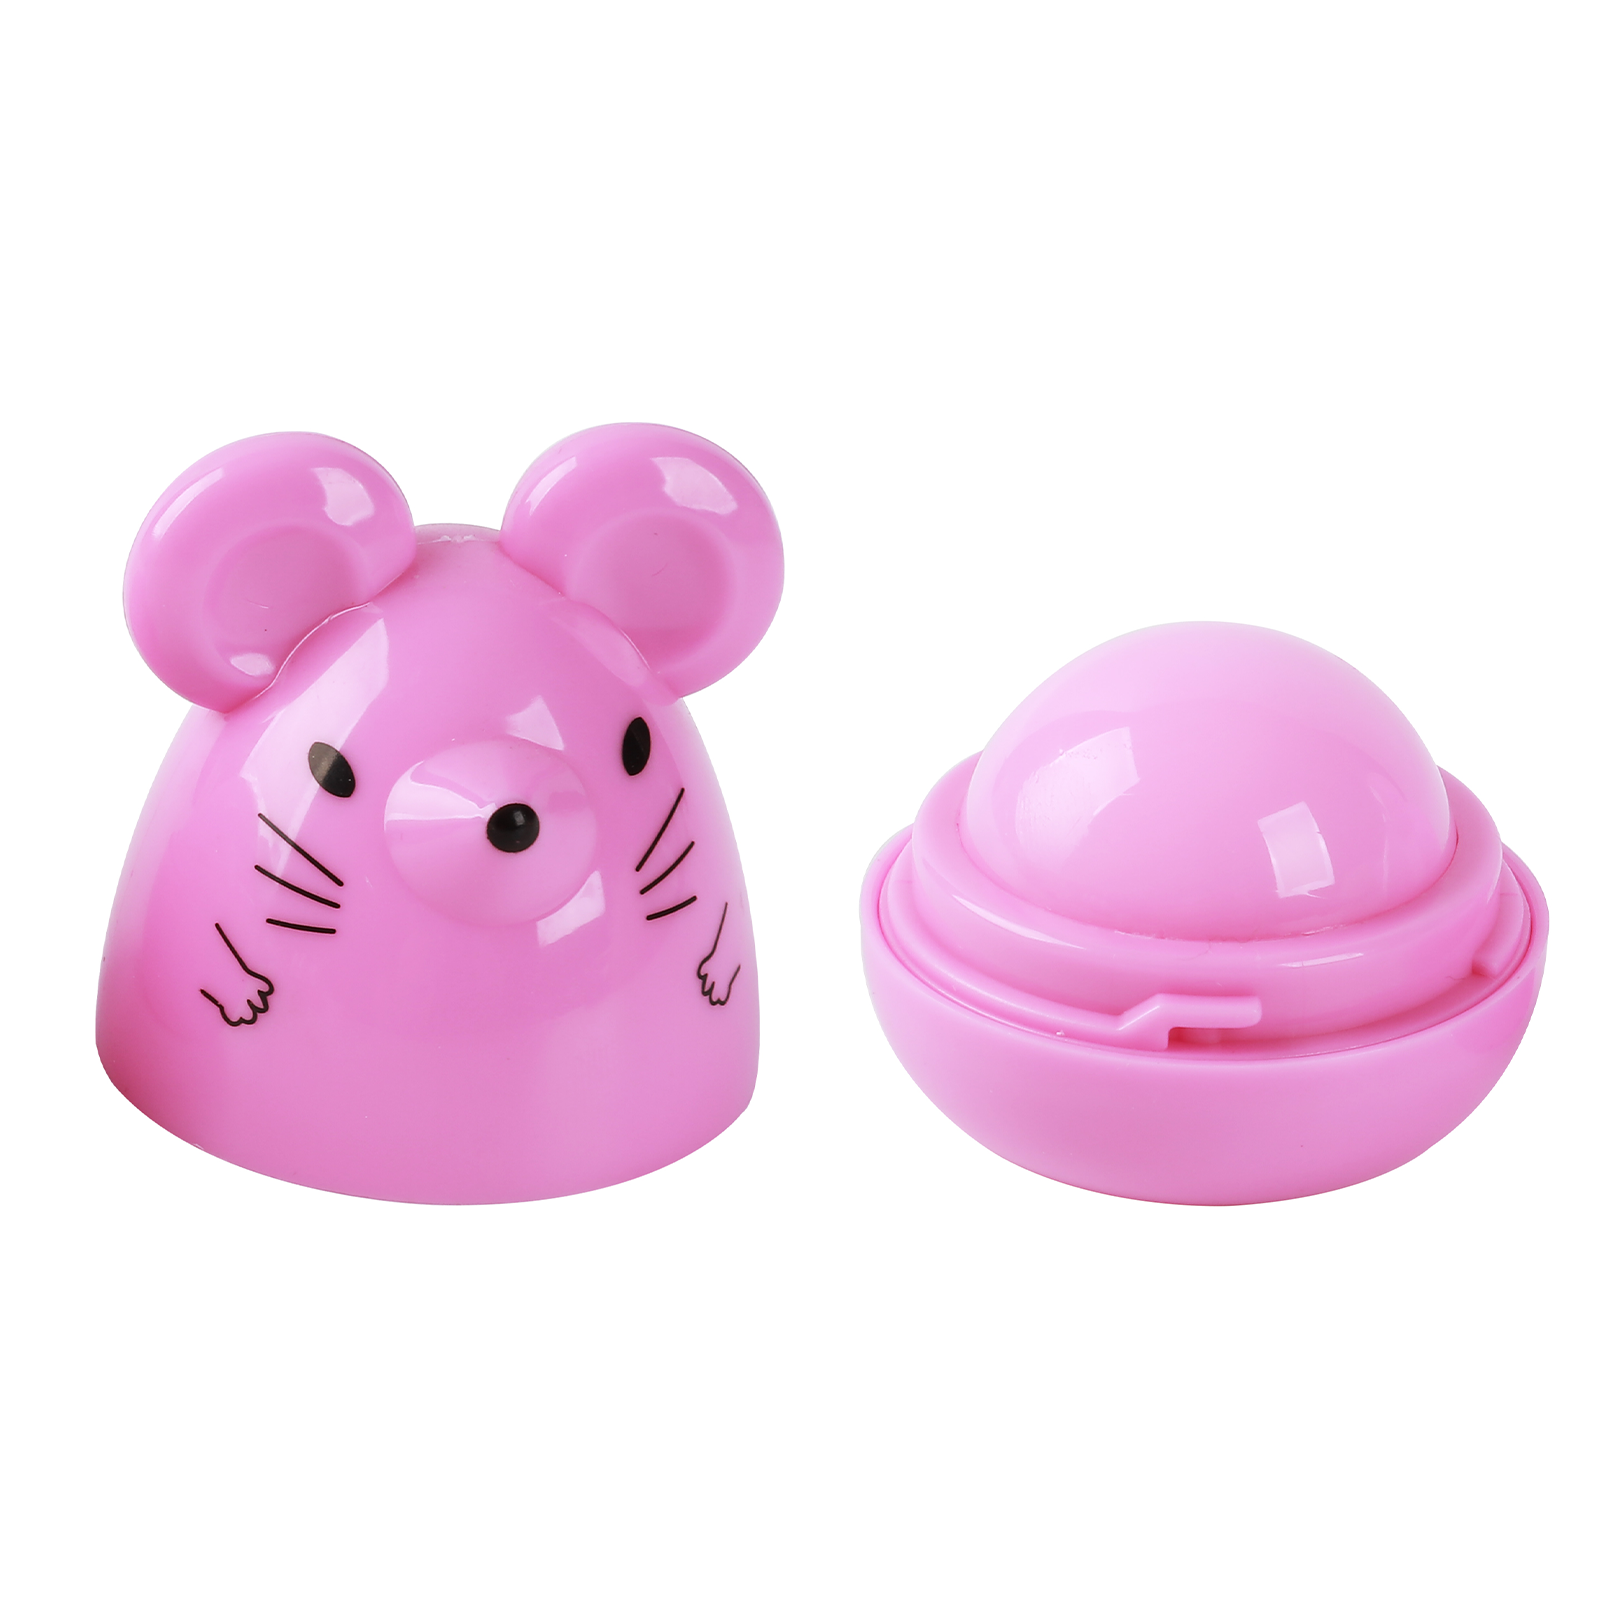 PXLOOK HYDRATING MOUSE LIP BALM